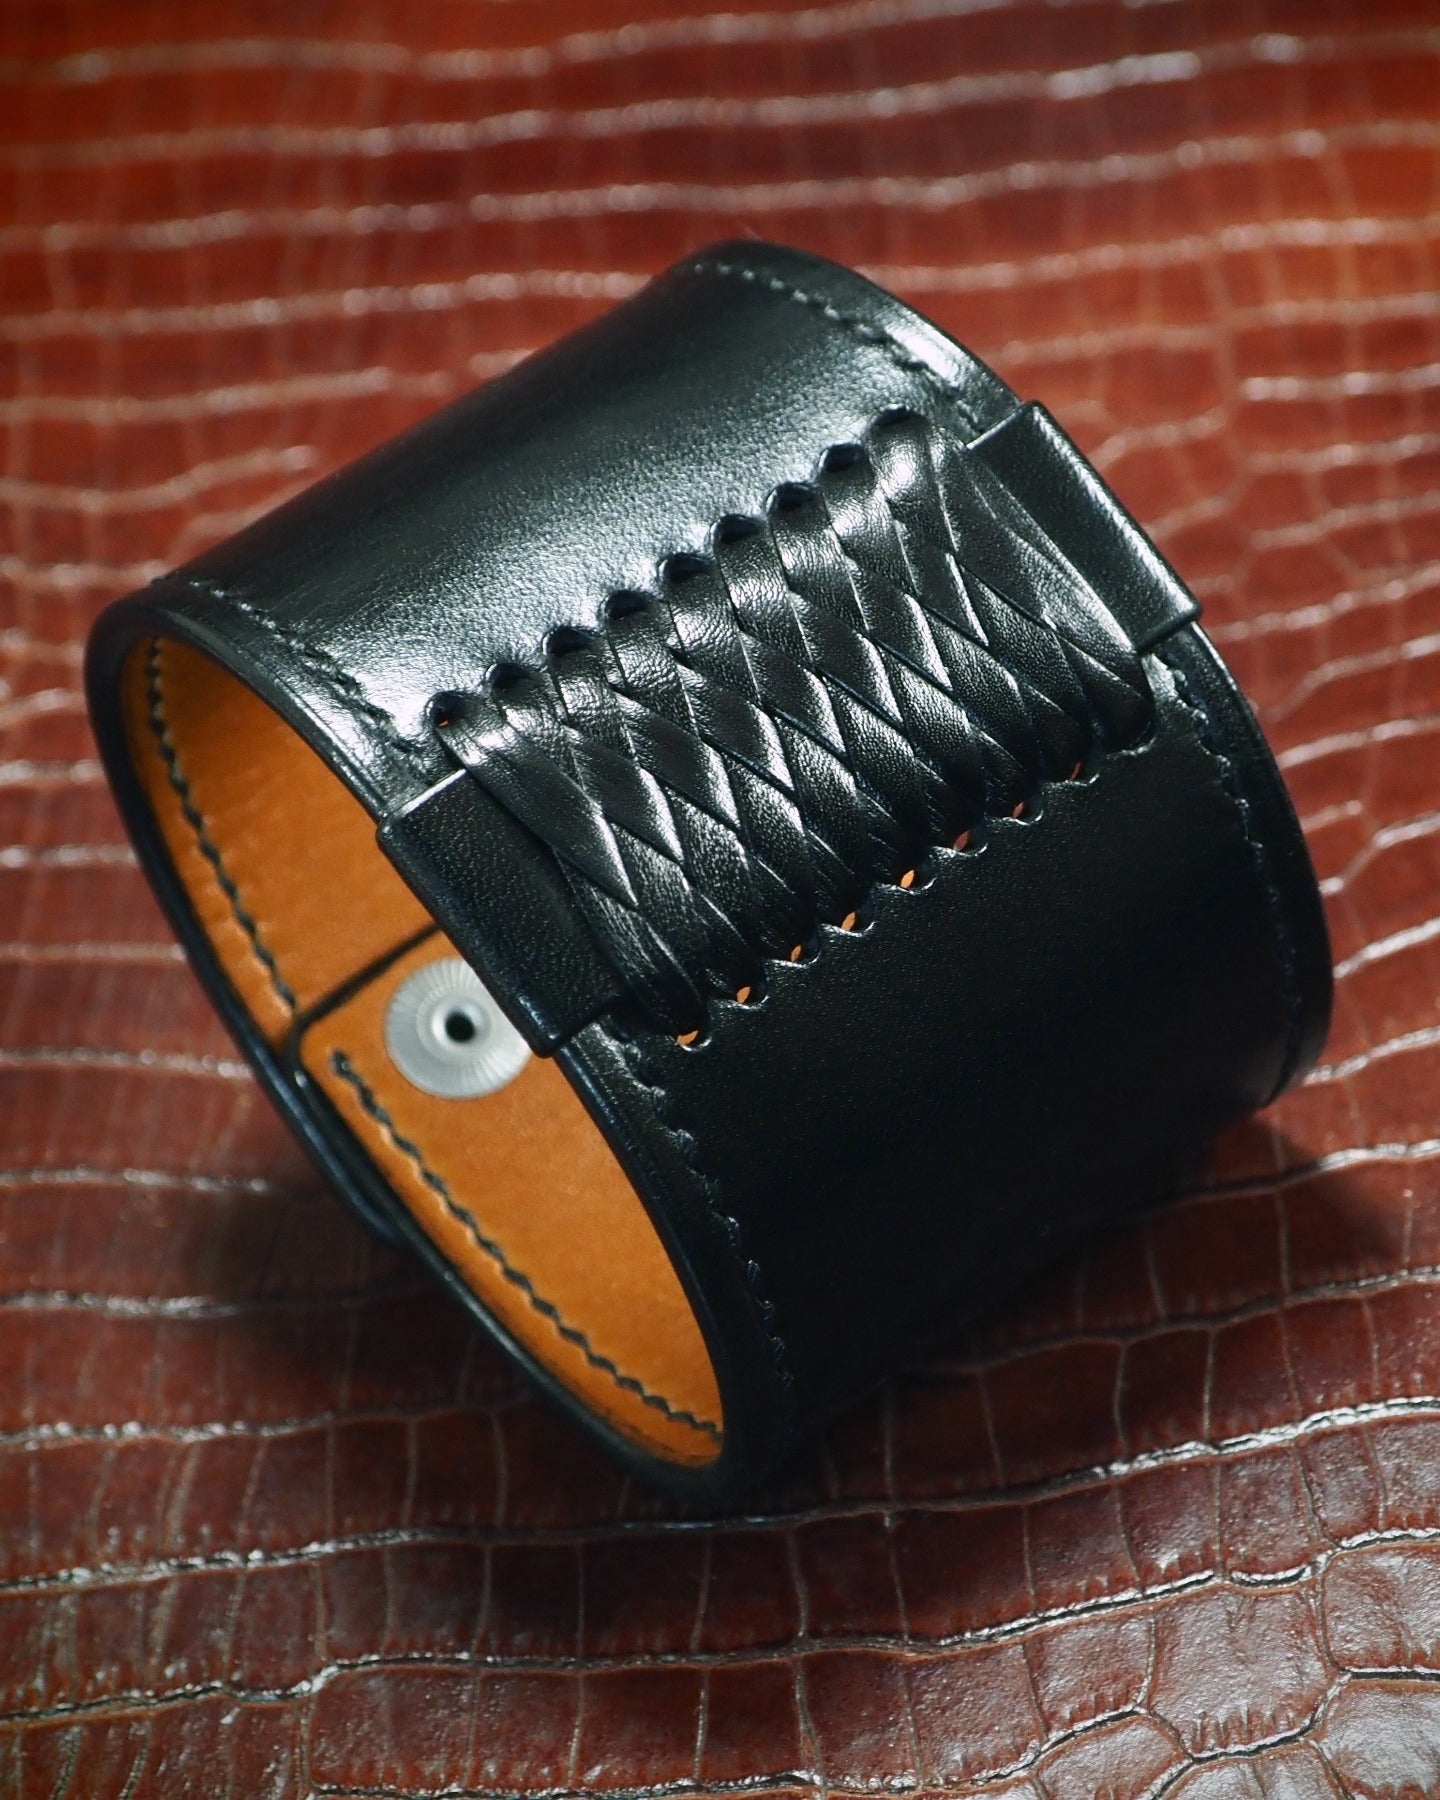 Black Leather cuff Bracelet : Braided Saddle wristband Handstitched. Handcrafted in New York!